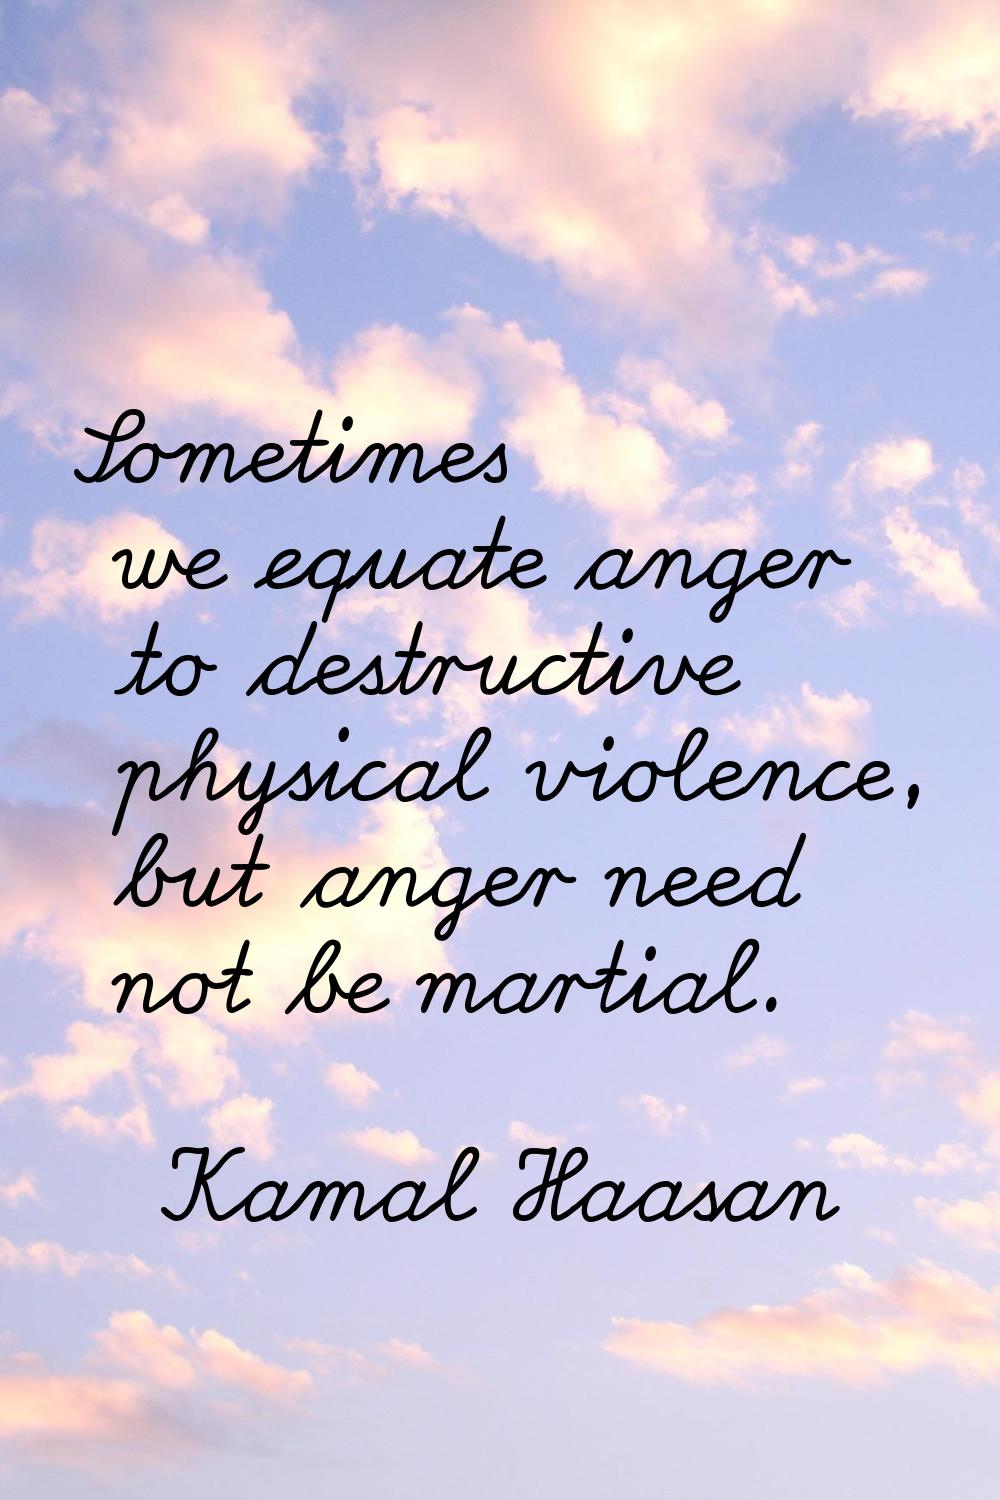 Sometimes we equate anger to destructive physical violence, but anger need not be martial.